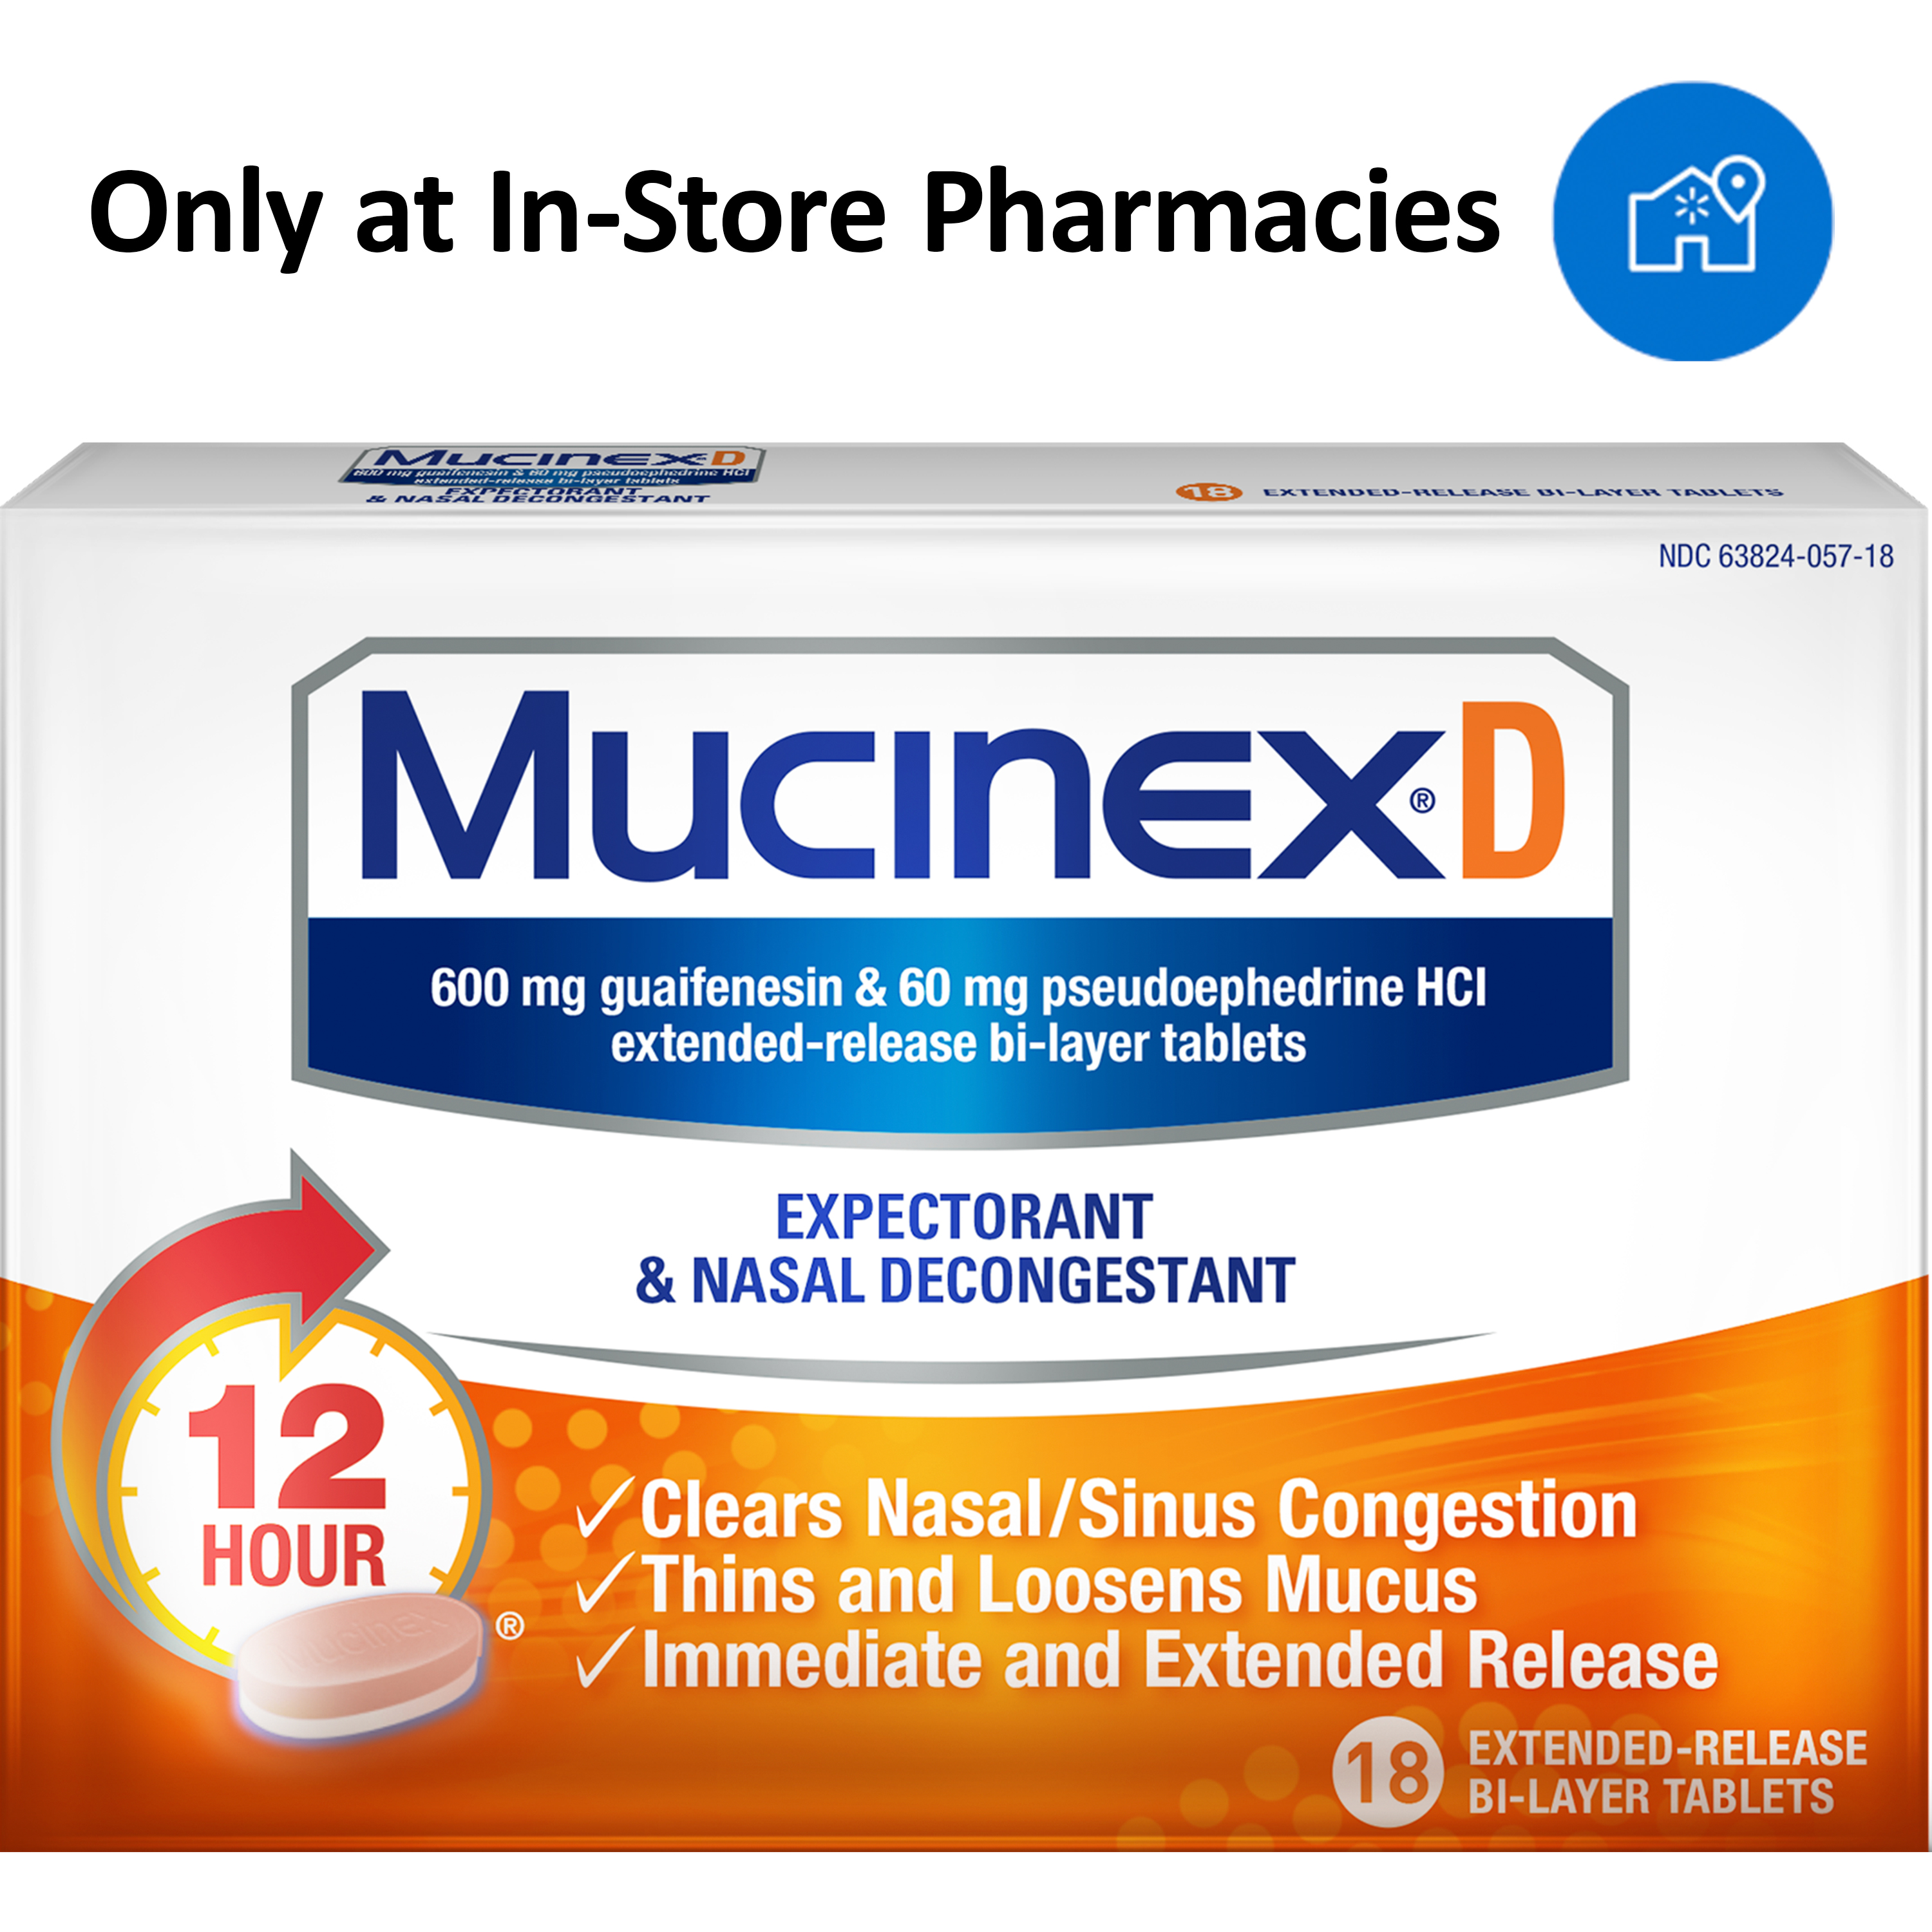 Mucinex D Expectorant and Nasal Decongestant Tablets, 18 Count - image 2 of 10